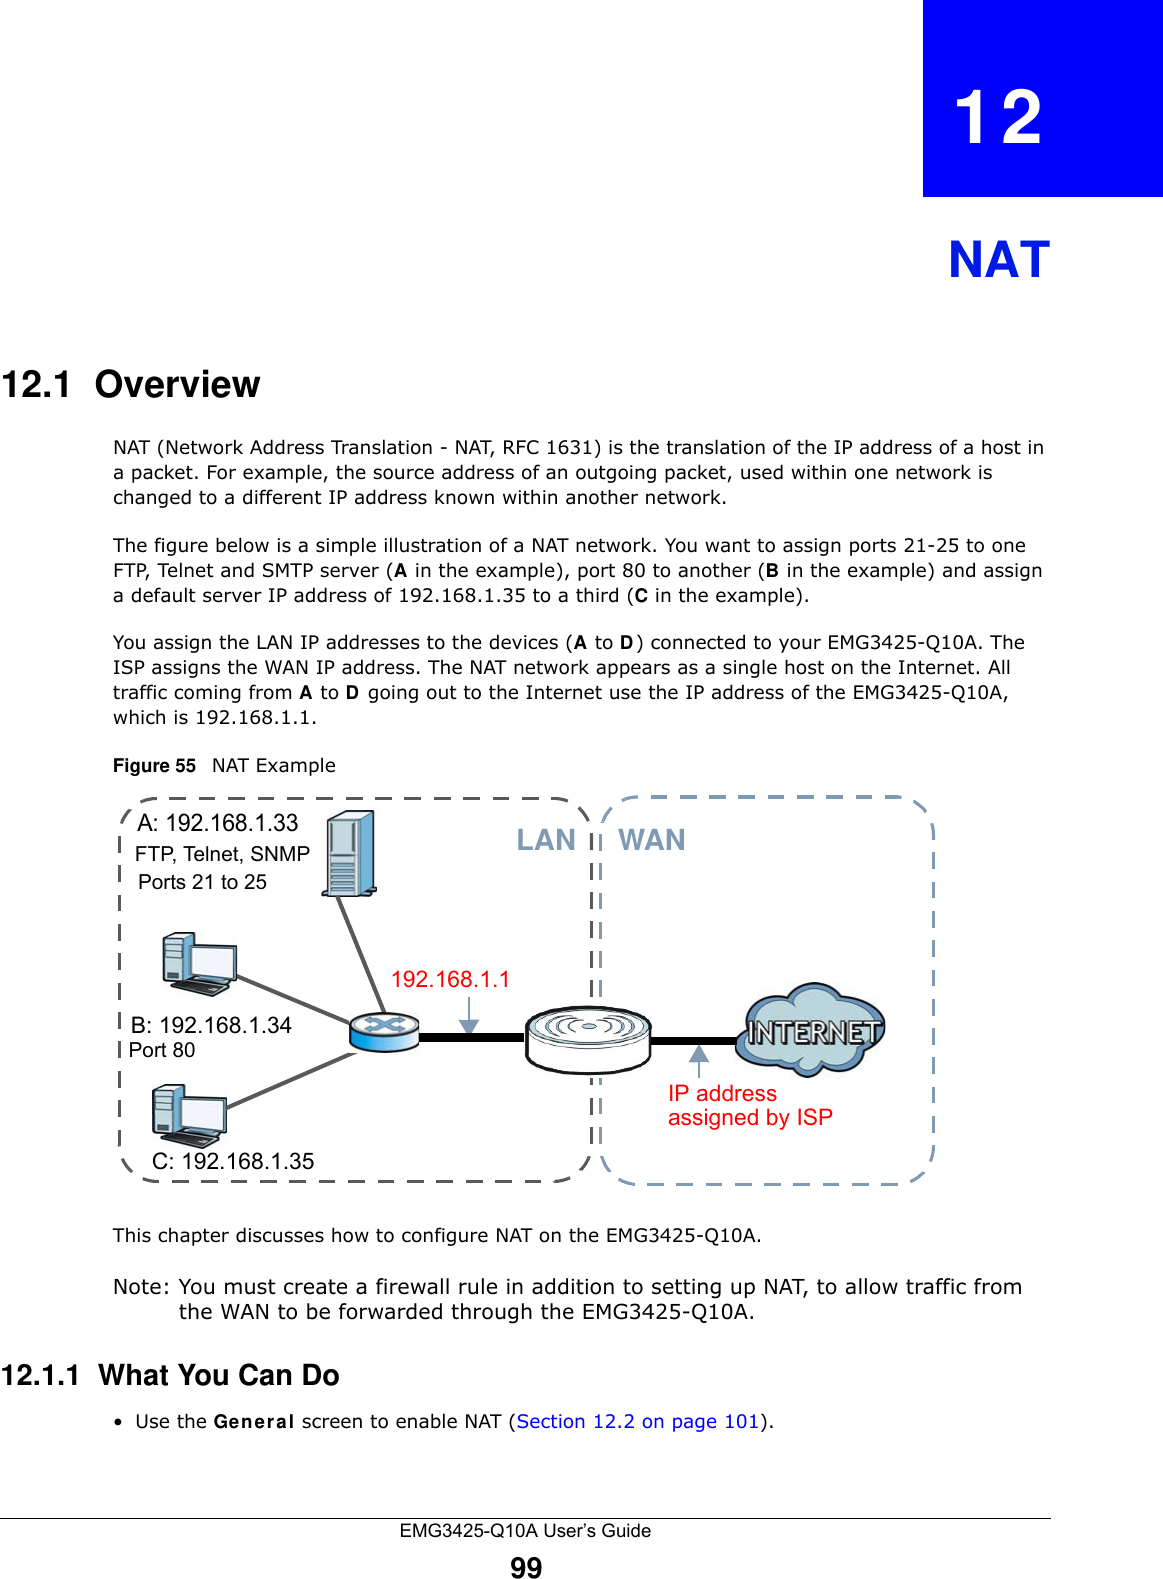 EMG3425-Q10A User’s Guide99CHAPTER   12NAT12.1  Overview   NAT (Network Address Translation - NAT, RFC 1631) is the translation of the IP address of a host in a packet. For example, the source address of an outgoing packet, used within one network is changed to a different IP address known within another network.The figure below is a simple illustration of a NAT network. You want to assign ports 21-25 to one FTP, Telnet and SMTP server (A in the example), port 80 to another (B in the example) and assign a default server IP address of 192.168.1.35 to a third (C in the example). You assign the LAN IP addresses to the devices (A to D) connected to your EMG3425-Q10A. The ISP assigns the WAN IP address. The NAT network appears as a single host on the Internet. All traffic coming from A to D going out to the Internet use the IP address of the EMG3425-Q10A, which is 192.168.1.1.Figure 55   NAT ExampleThis chapter discusses how to configure NAT on the EMG3425-Q10A.Note: You must create a firewall rule in addition to setting up NAT, to allow traffic from the WAN to be forwarded through the EMG3425-Q10A.12.1.1  What You Can Do•Use the Ge n e r a l screen to enable NAT (Section 12.2 on page 101).A: 192.168.1.33B: 192.168.1.34C: 192.168.1.35IP address 192.168.1.1WANLANassigned by ISPFTP, Telnet, SNMPPort 80Ports 21 to 25